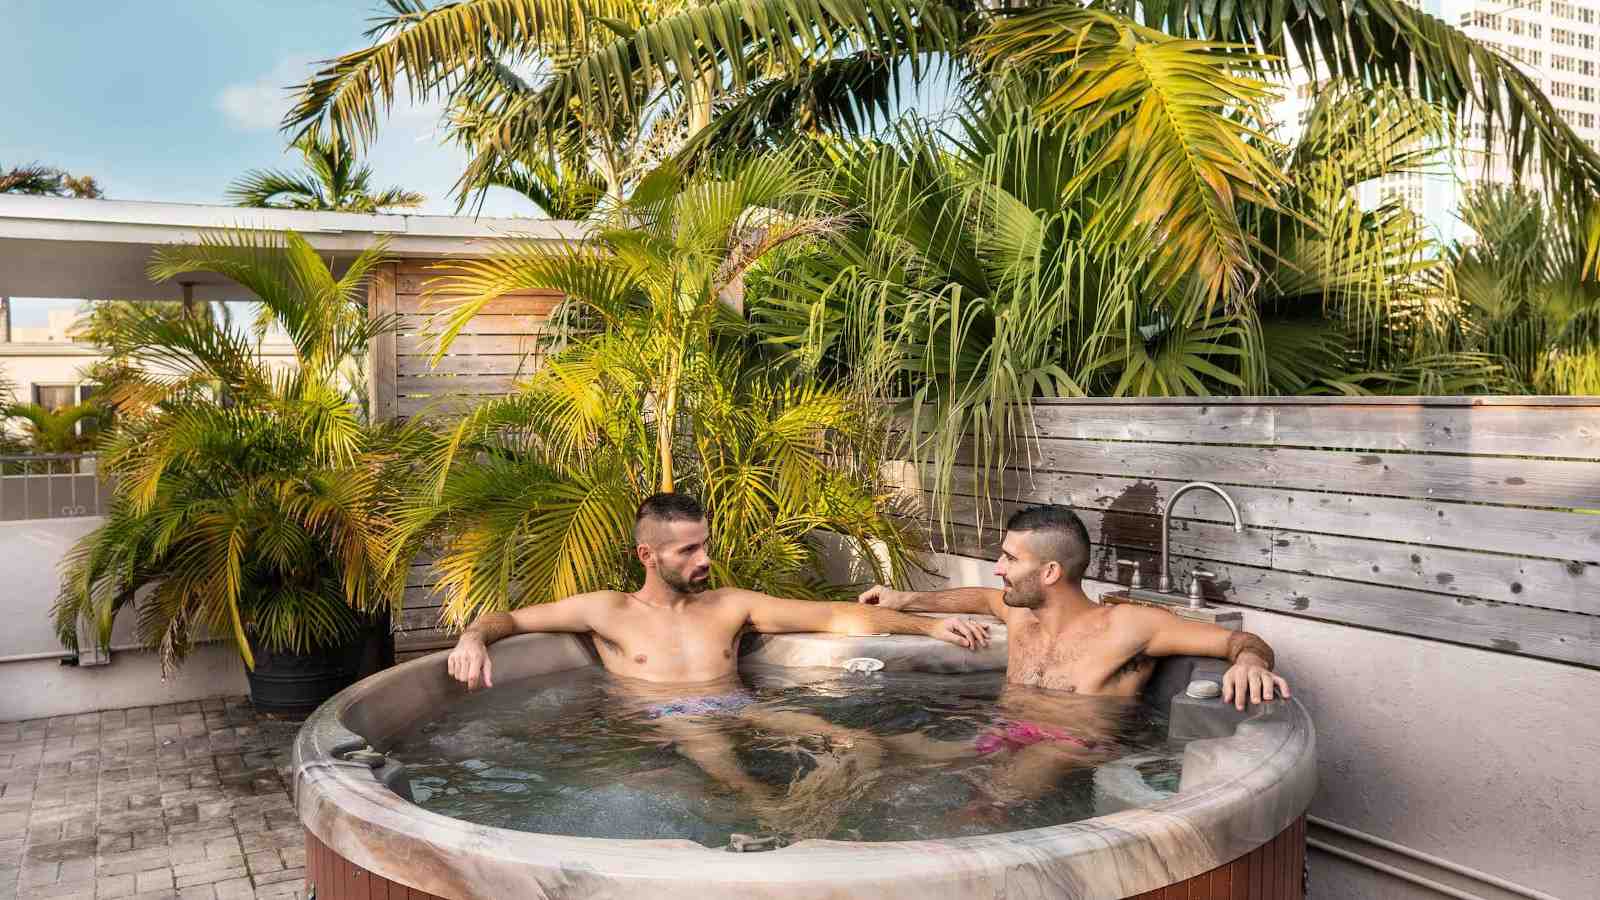 The Grand Resort and Spa is one of the most famous gay resorts in Fort Lauderdale, that's male-only and clothing-optional as well!